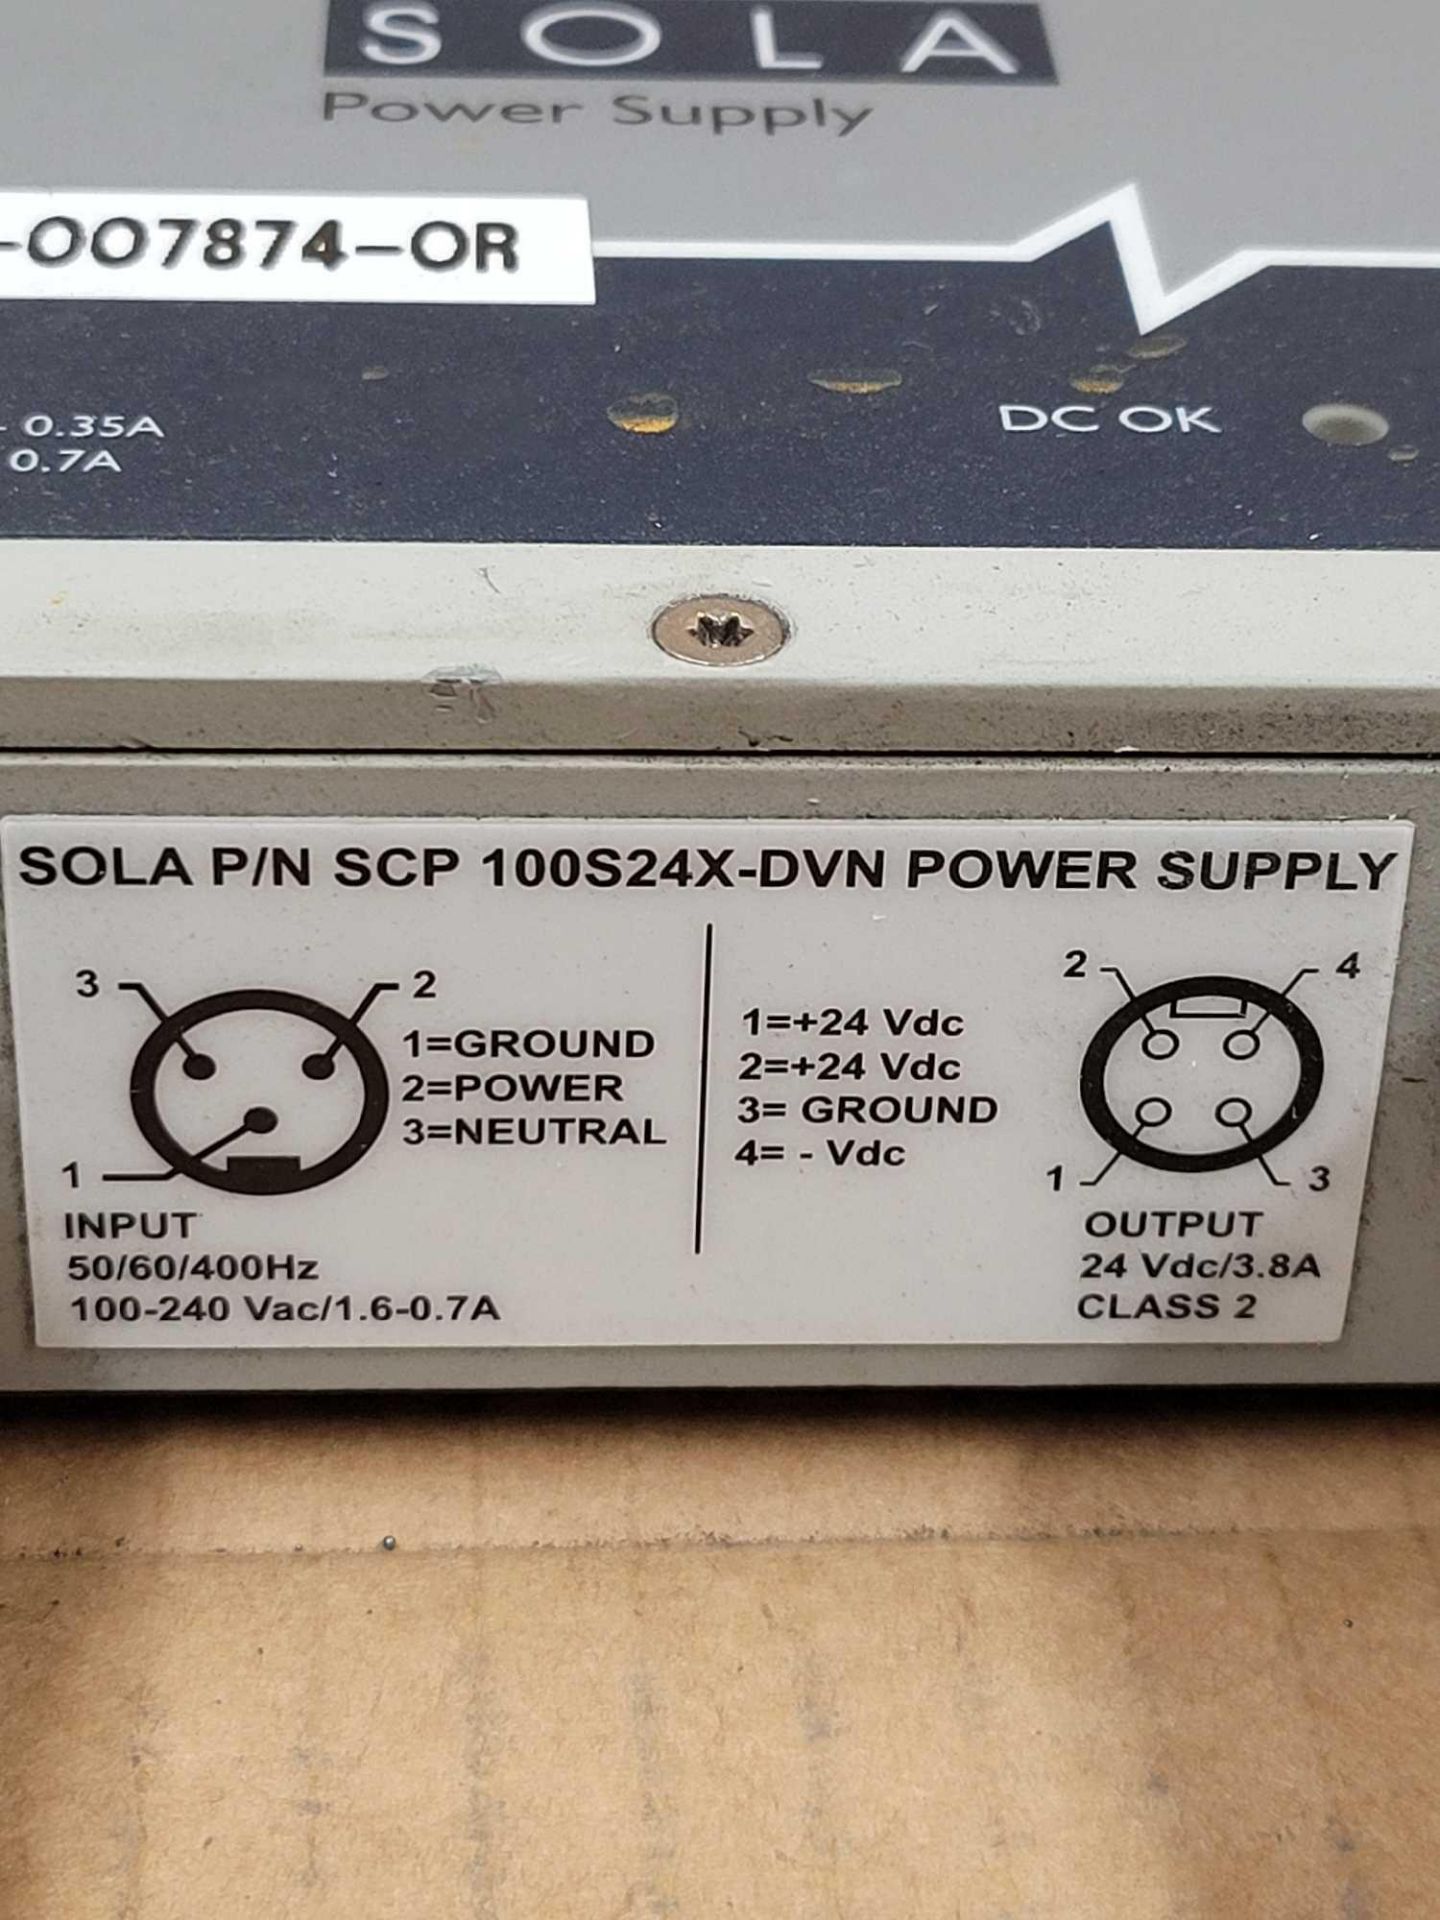 LOT OF 4 SOLA SCP 100S24X-DVN / Power Supply  /  Lot Weight: 12.4 lbs - Image 3 of 6